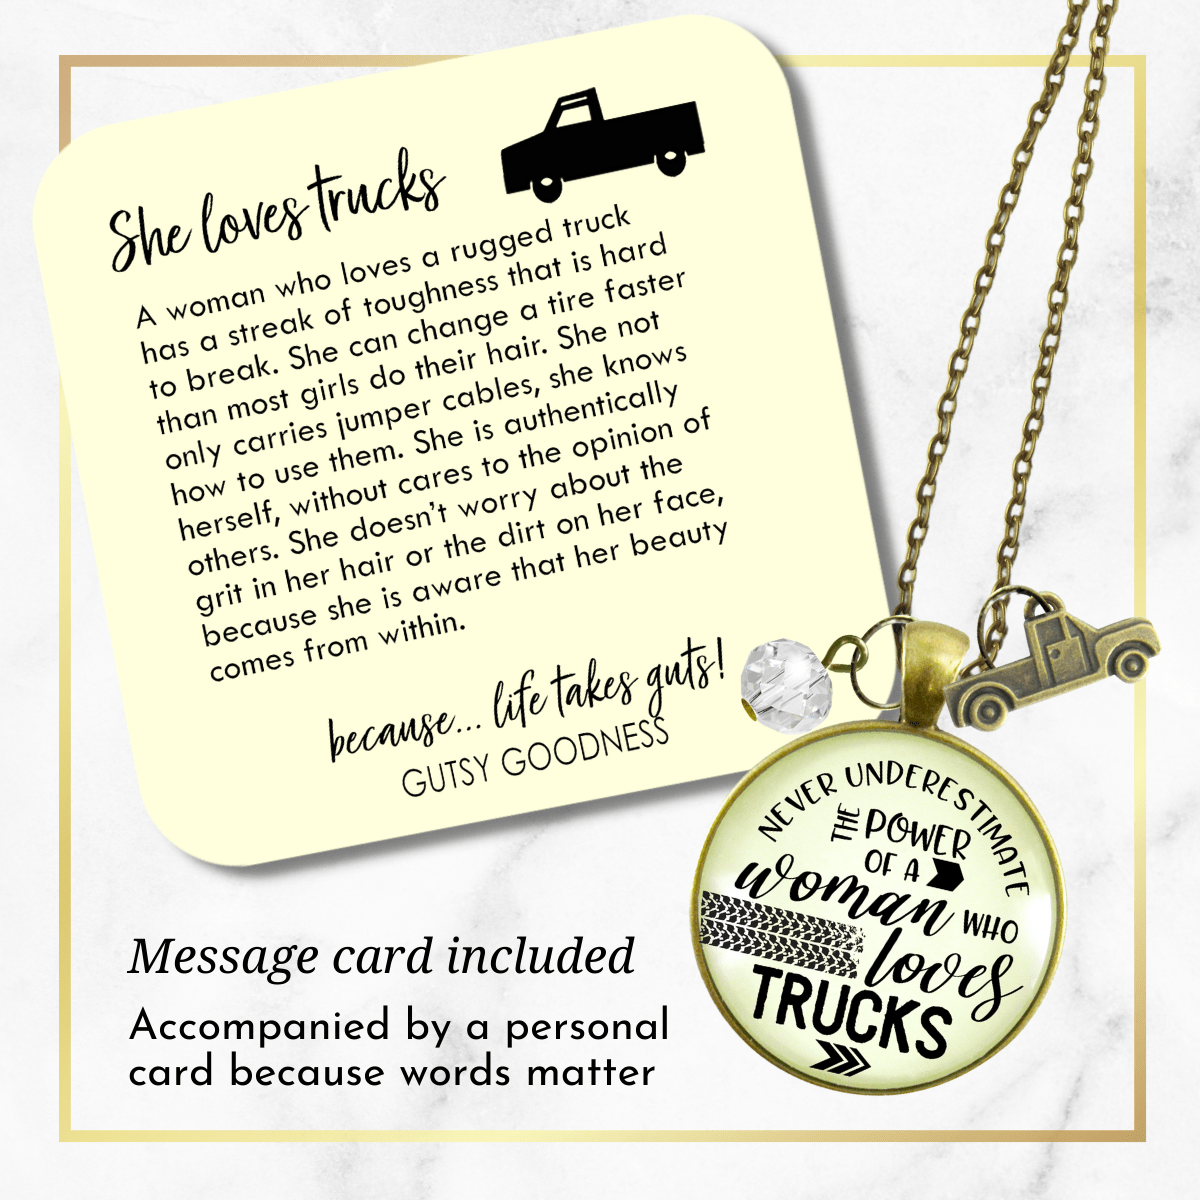 Gutsy Goodness Truck Charm Necklace Never Underestimate Woman Loves Country Jewelry - Gutsy Goodness Handmade Jewelry;Truck Charm Necklace Never Underestimate Woman Loves Country Jewelry - Gutsy Goodness Handmade Jewelry Gifts